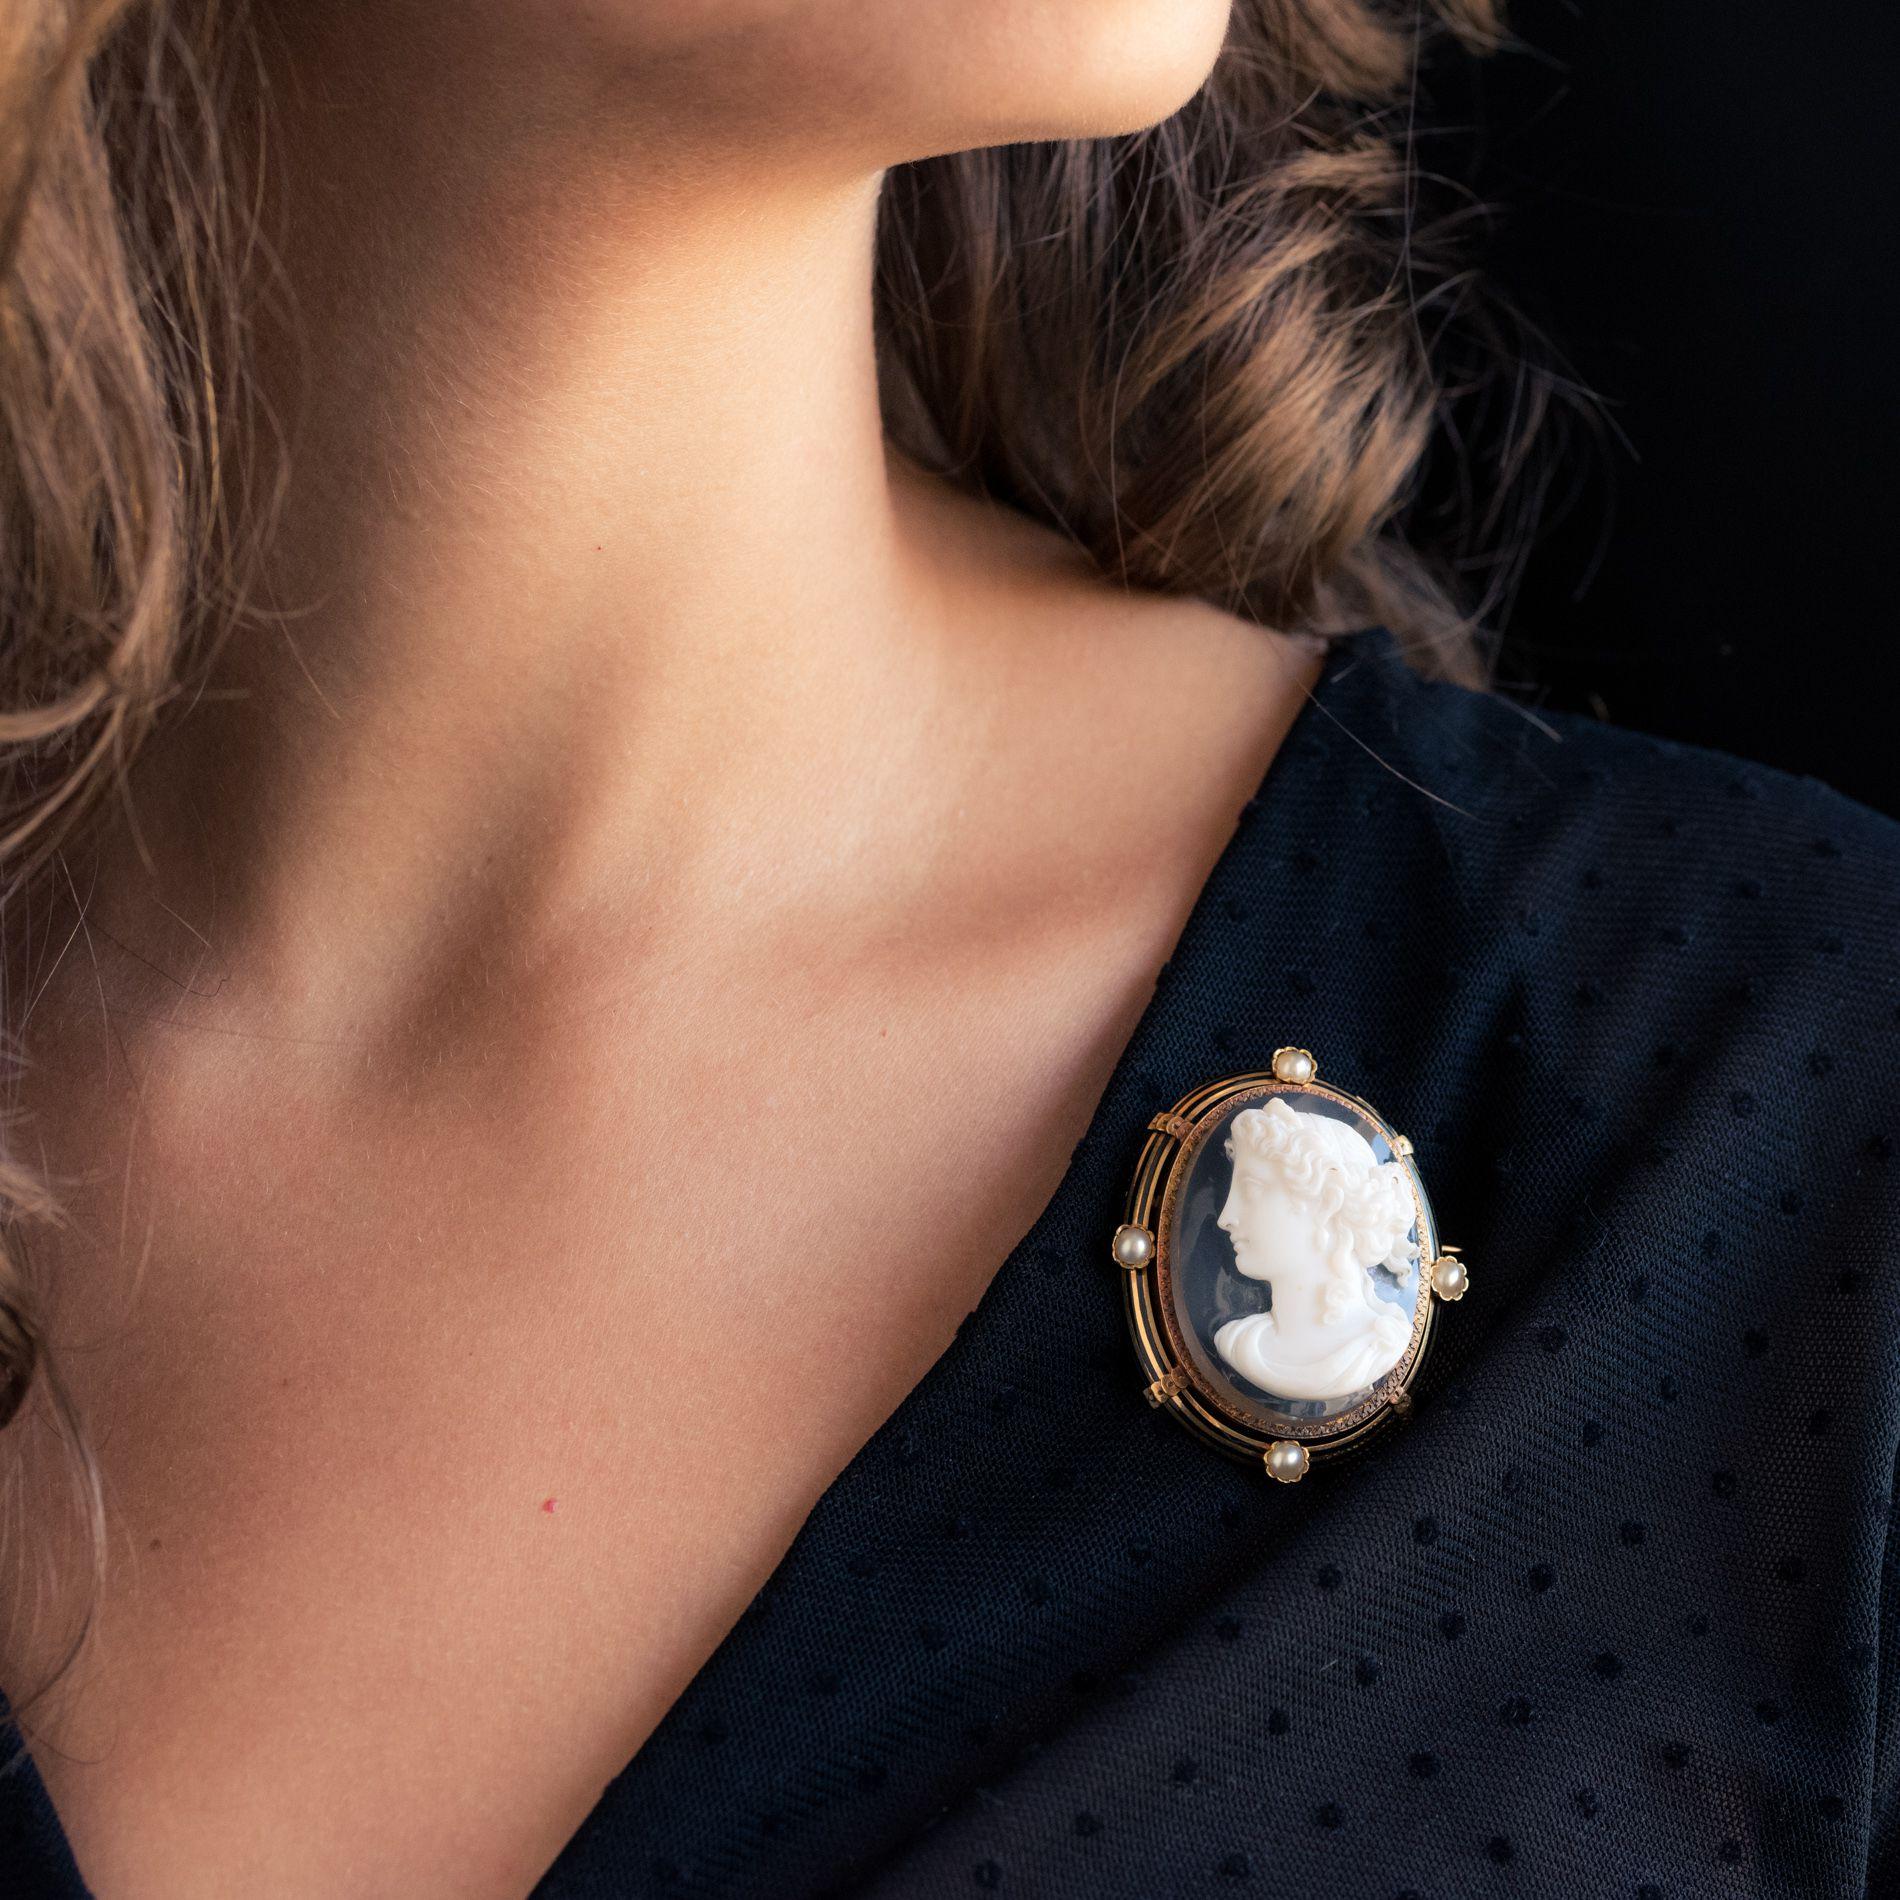 Cameo Brooch in 18 carat yellow gold, eagle head hallmark. 
This splendid antique brooch displays the left profile of a woman with her hair up, engraved into a single piece of agate. The surround is decorated with fine bands of black enamel with